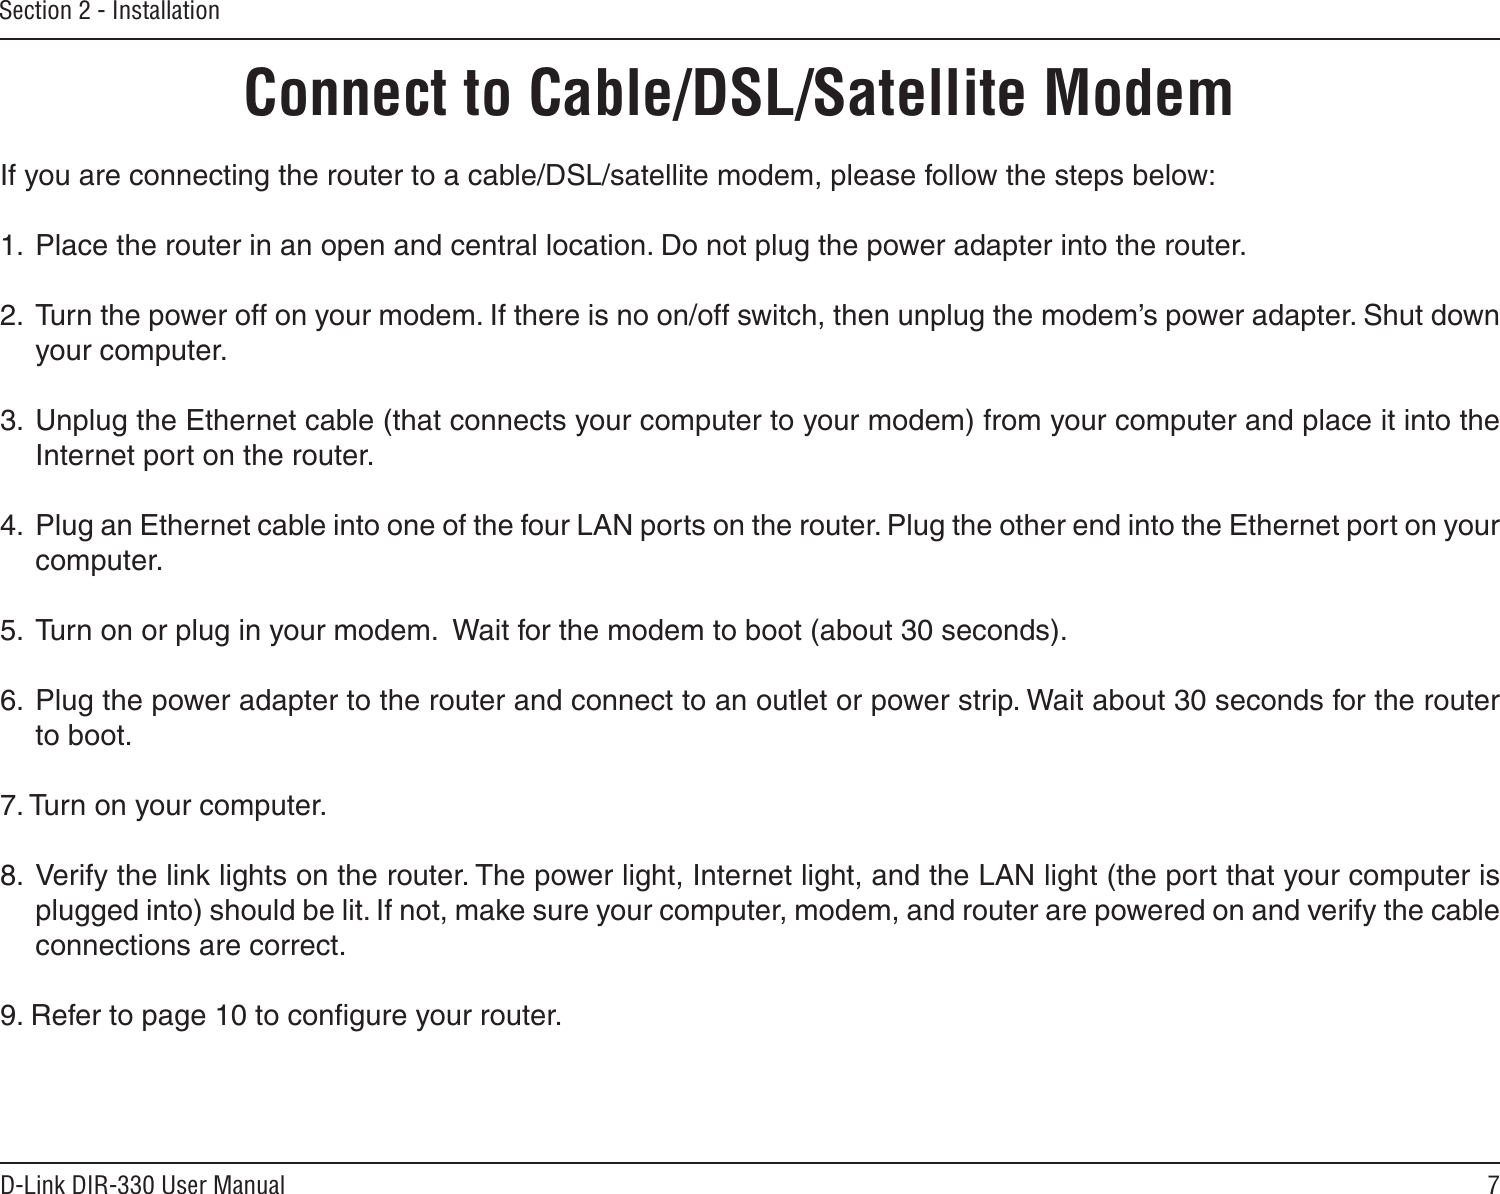 7D-Link DIR-330 User ManualSection 2 - InstallationIf you are connecting the router to a cable/DSL/satellite modem, please follow the steps below:1.  Place the router in an open and central location. Do not plug the power adapter into the router. 2.  Turn the power off on your modem. If there is no on/off switch, then unplug the modem’s power adapter. Shut down your computer.3.  Unplug the Ethernet cable (that connects your computer to your modem) from your computer and place it into the Internet port on the router.  4.  Plug an Ethernet cable into one of the four LAN ports on the router. Plug the other end into the Ethernet port on your computer.5.  Turn on or plug in your modem.  Wait for the modem to boot (about 30 seconds). 6.  Plug the power adapter to the router and connect to an outlet or power strip. Wait about 30 seconds for the router to boot. 7. Turn on your computer. 8.  Verify the link lights on the router. The power light, Internet light, and the LAN light (the port that your computer is plugged into) should be lit. If not, make sure your computer, modem, and router are powered on and verify the cable connections are correct. 9. Refer to page 10 to conﬁgure your router.Connect to Cable/DSL/Satellite Modem